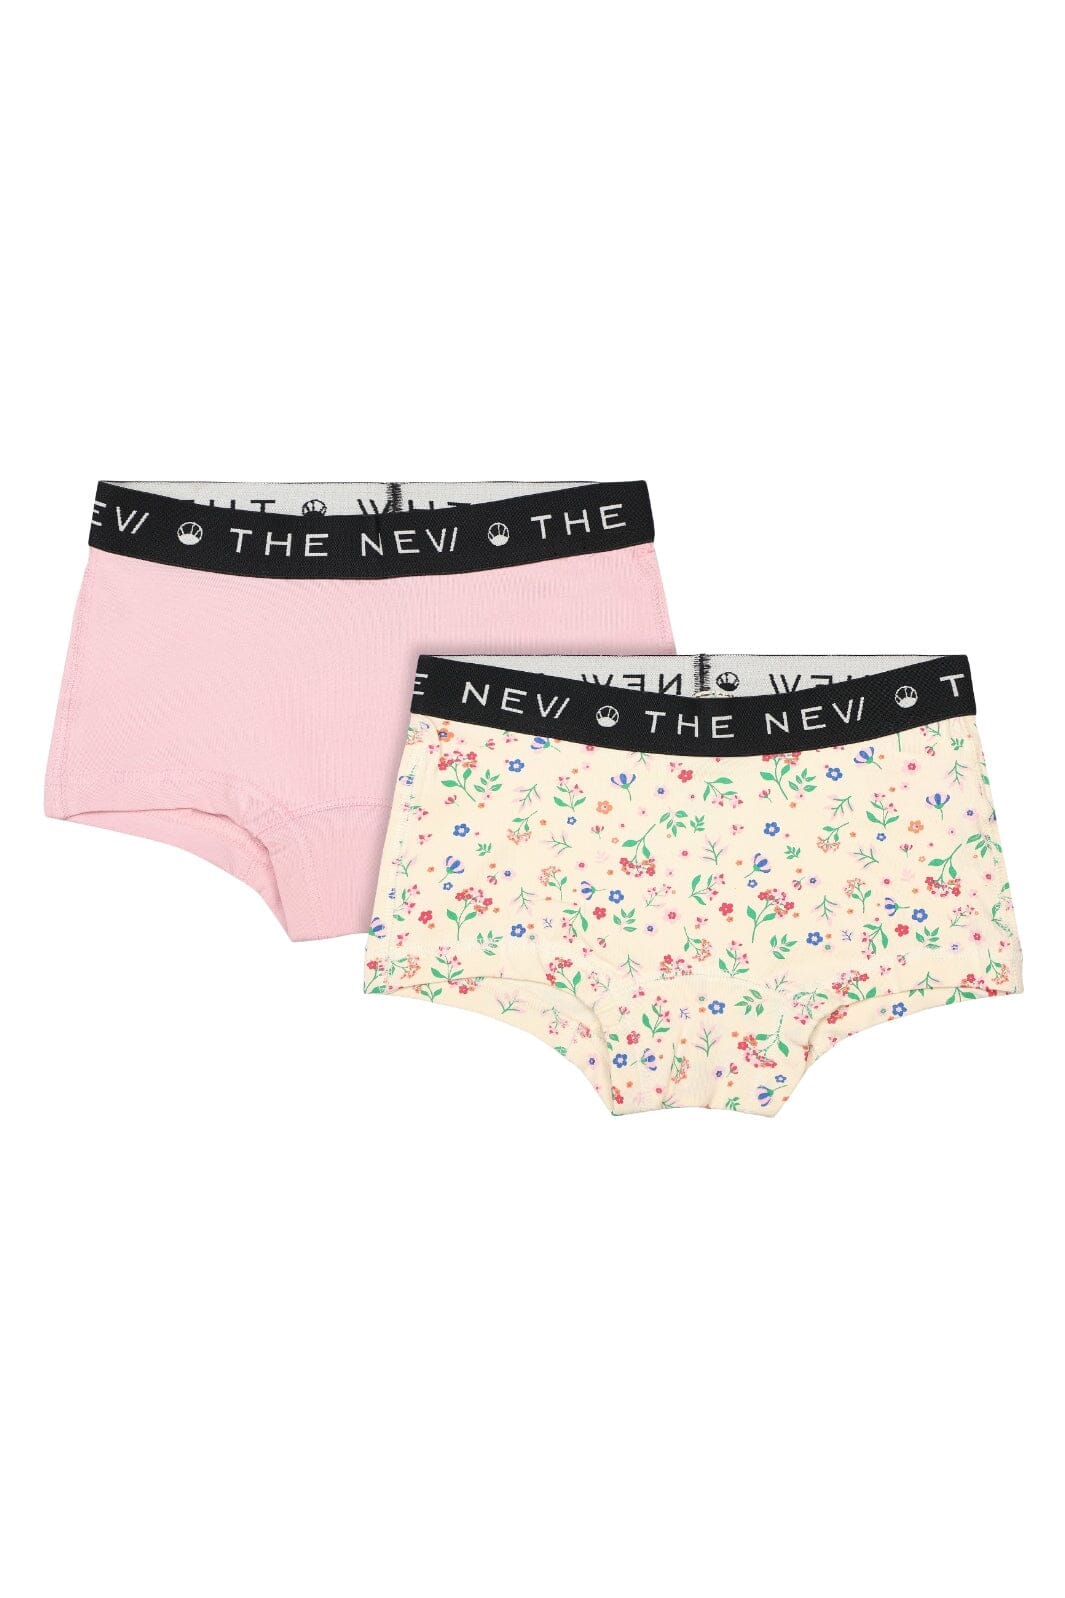 The New - The New Hipsters 2-Pack - Pink Nectar Underbukser 